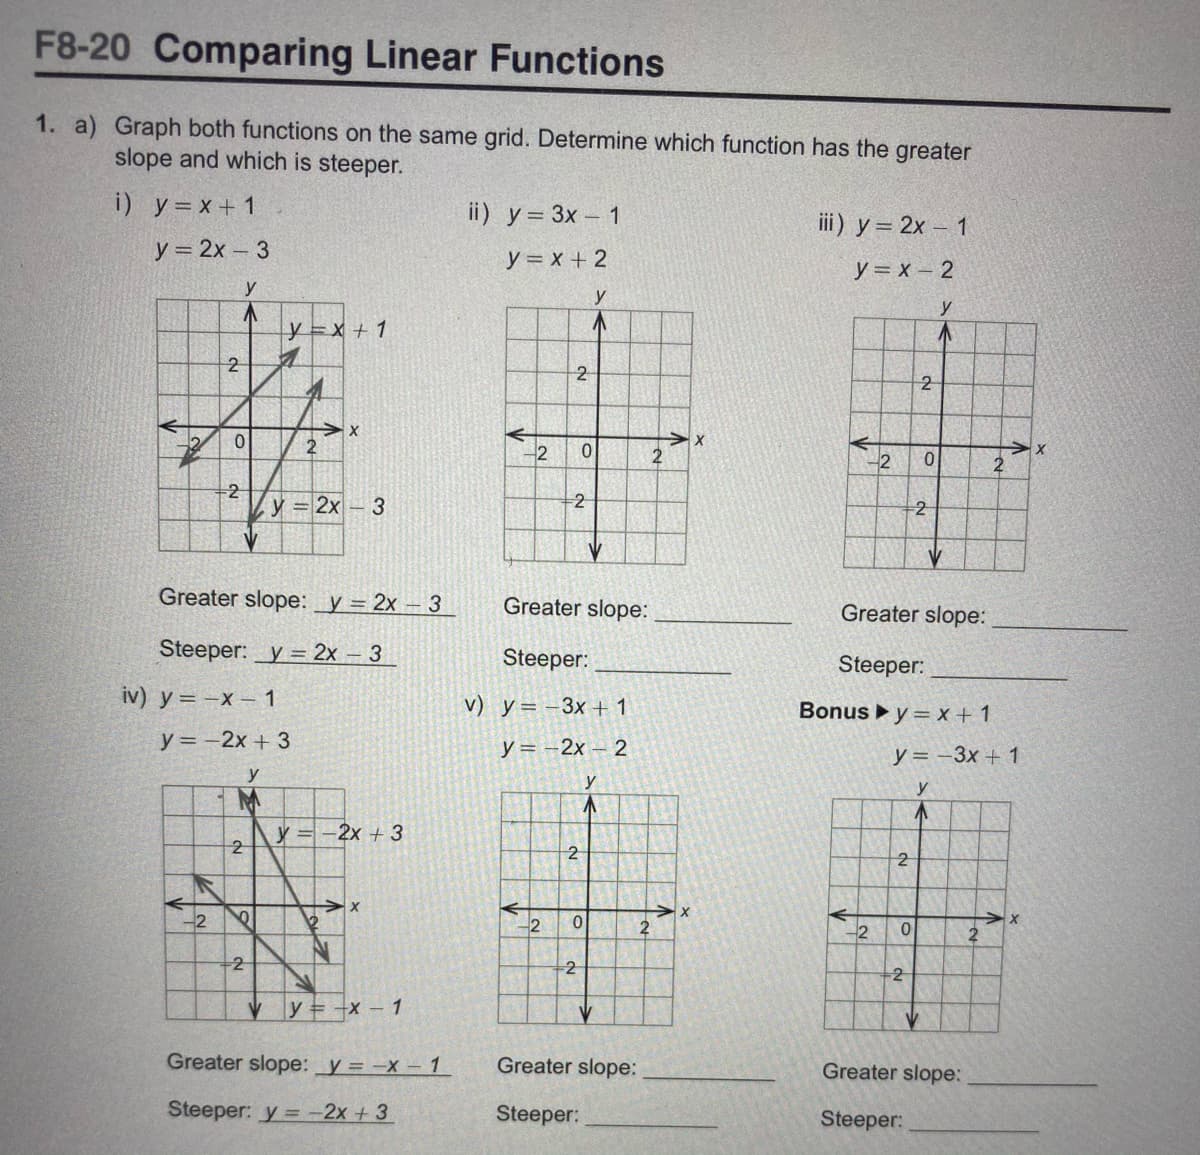 F8-20 Comparing Linear Functions
1. a) Graph both functions on the same grid. Determine which function has the greater
slope and which is steeper.
i) y=x+ 1
ii) y= 3x – 1
iii) y = 2x – 1
У 3 2х - 3
y = x + 2
y = x – 2
y
y
y
y =x + 1
2
2
2
2
2
2
y = 2x 3
-2
2
Greater slope:_y = 2x – 3
Greater slope:
Greater slope:
Steeper:_y = 2x – 3
Steeper:
Steeper:
iv) y = -x 1
v) y= -3x + 1
Bonus y = x + 1
y = -2x + 3
y = -2x – 2
y = -3x + 1
y
y
y
y =-2x + 3
2
-2
-2
-2
2
-2
-2
-2
V y = +x - 1
Greater slope:_y = -X - 1
Greater slope:
Greater slope:
Steeper: y =-2x +3
Steeper:
Steeper:
